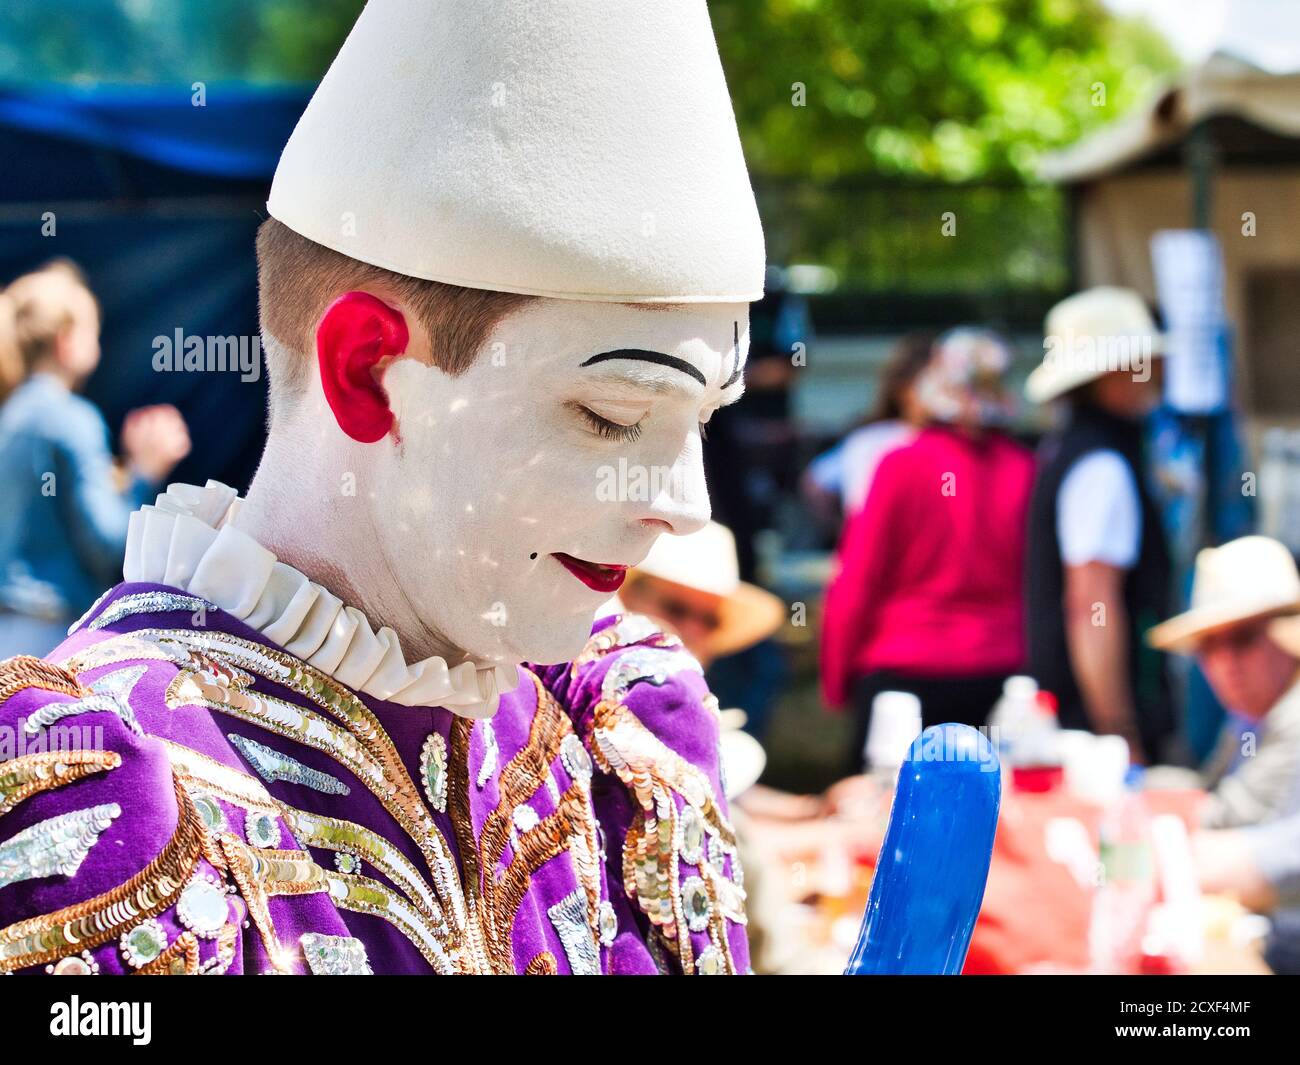 YAINVILLE, FRANCE - JULY Circa, 2019. Unidentified sad face headshot pierrot actor at the spectacle for Armada parade Stock Photo